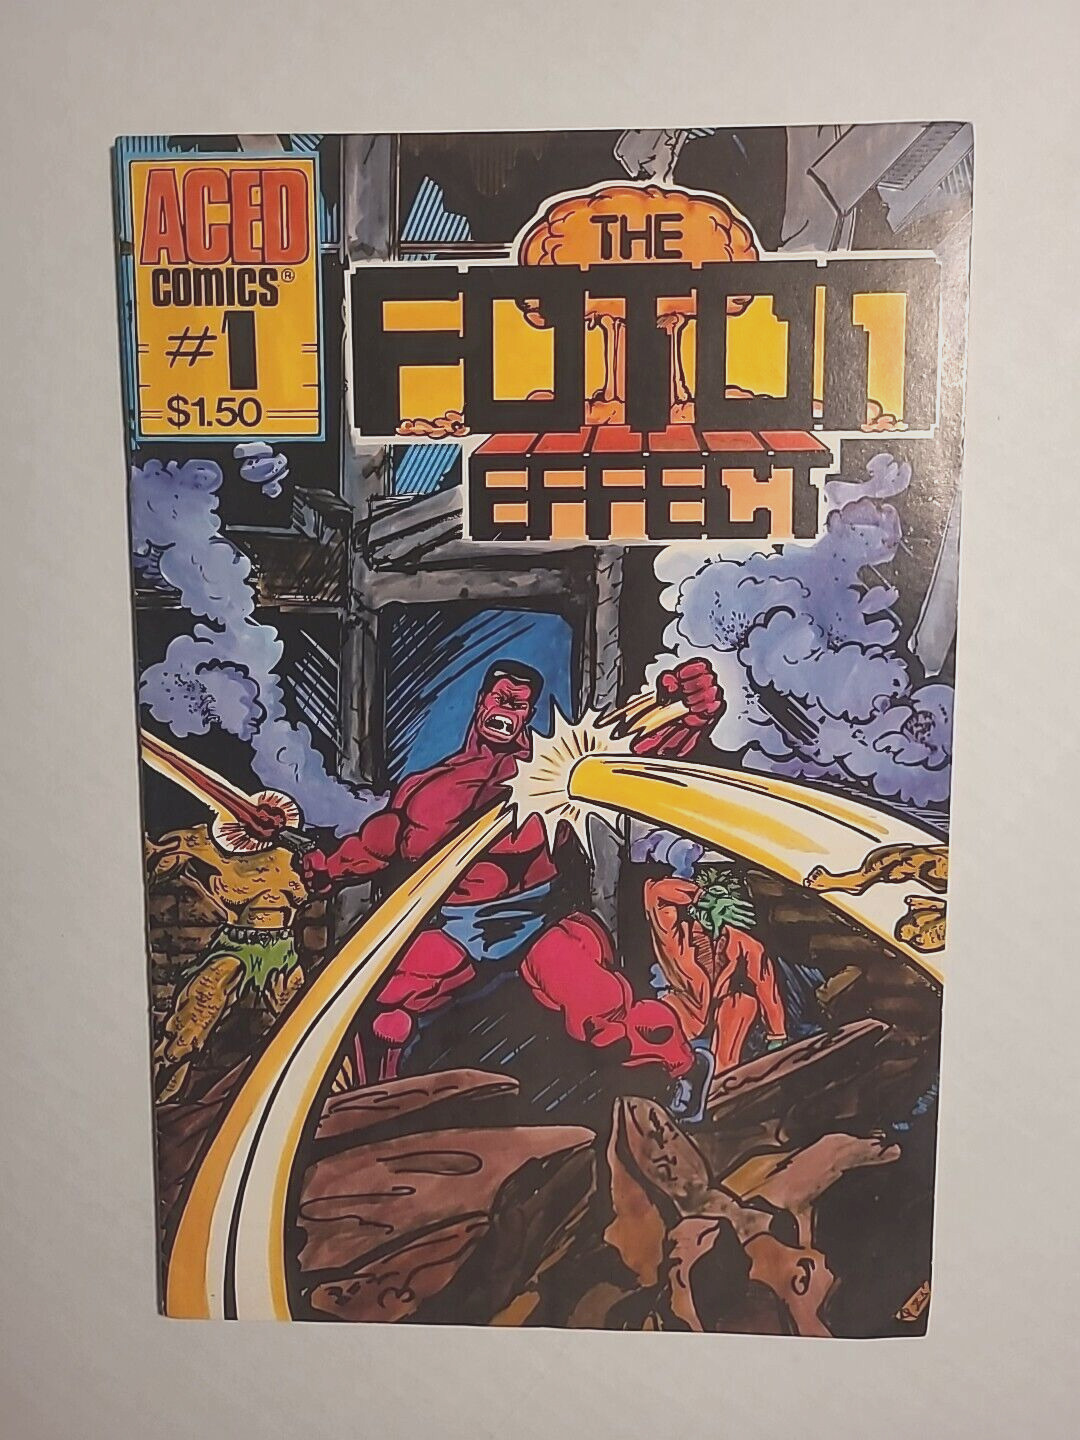 Comic Book Foton Effect, The #1 (Oct 1986, Aced) very good condition.